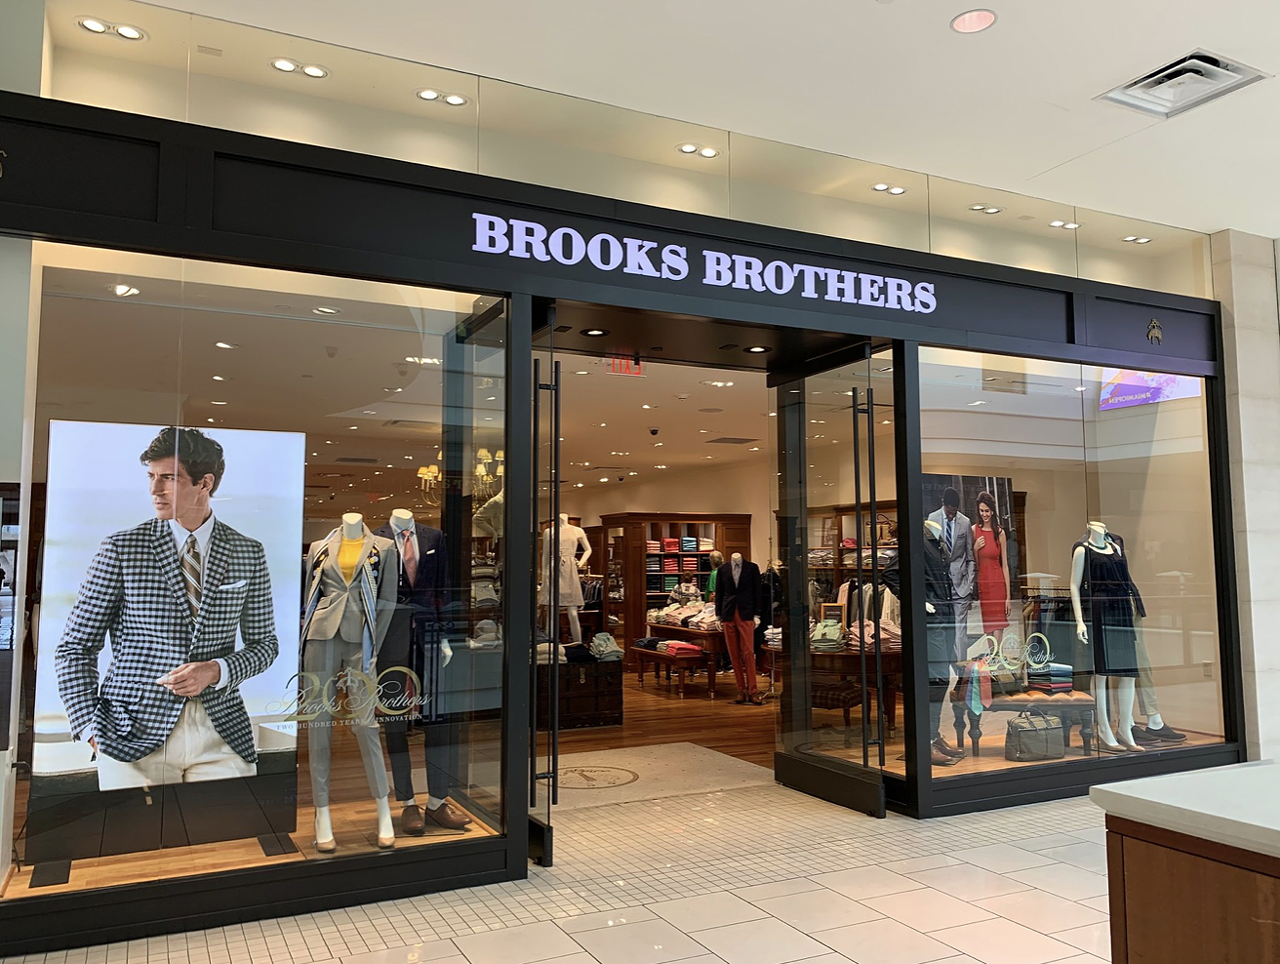 Brooks Brothers at Tower City
230 W. Huron Rd., Cleveland
Brooks Brothers, the upscale men's clothing store that was one of the original tenants at the Avenue at Tower City, closed in 2020, three months after the start of the COVID-19 pandemic. In 1990, when the former Cleveland Union Terminal was dramatically transformed into "The Avenue" shopping mall at the hands of Forest City Enterprises, Brooks Brothers was one of the swanky tenants that signed early leases. Alongside Gianni Versace boutique, Gucci, Bally's of Switzerland, Harve Benard and the Los Angeles men's clothier Politix, Brooks Brothers fit squarely with Forest City's plan to create a high-end, specialty retail destination for Cleveland shoppers. Brooks Brothers had been the only retail outlets that remained from The Avenue's original tenant list.